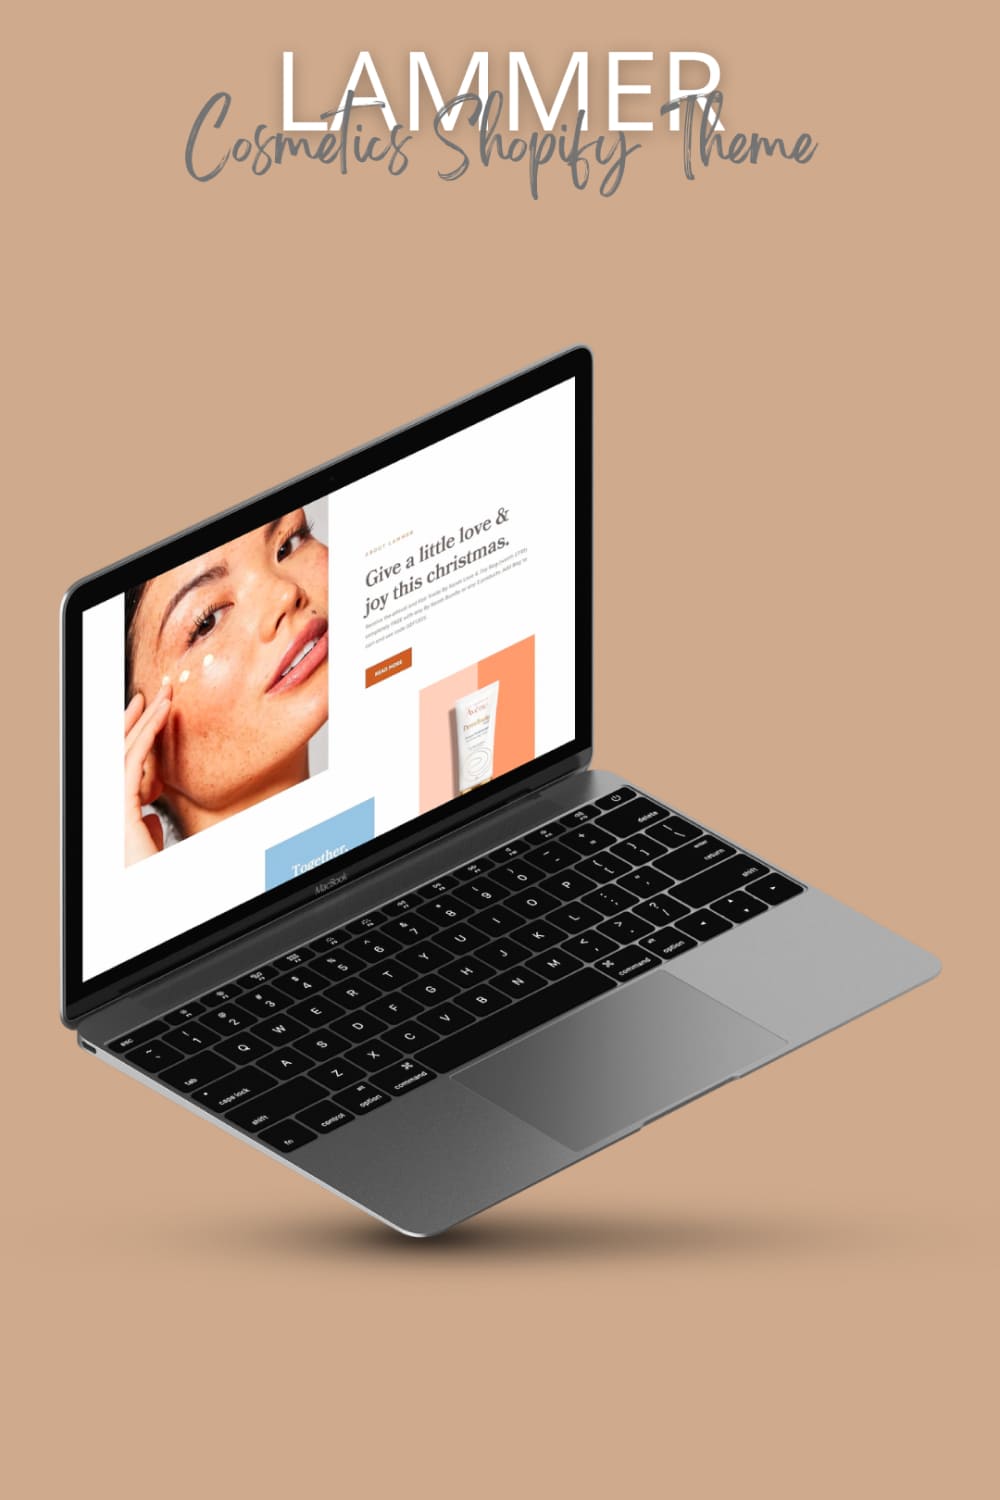 Lammer - Cosmetics Shopify Theme - pinterest image preview.